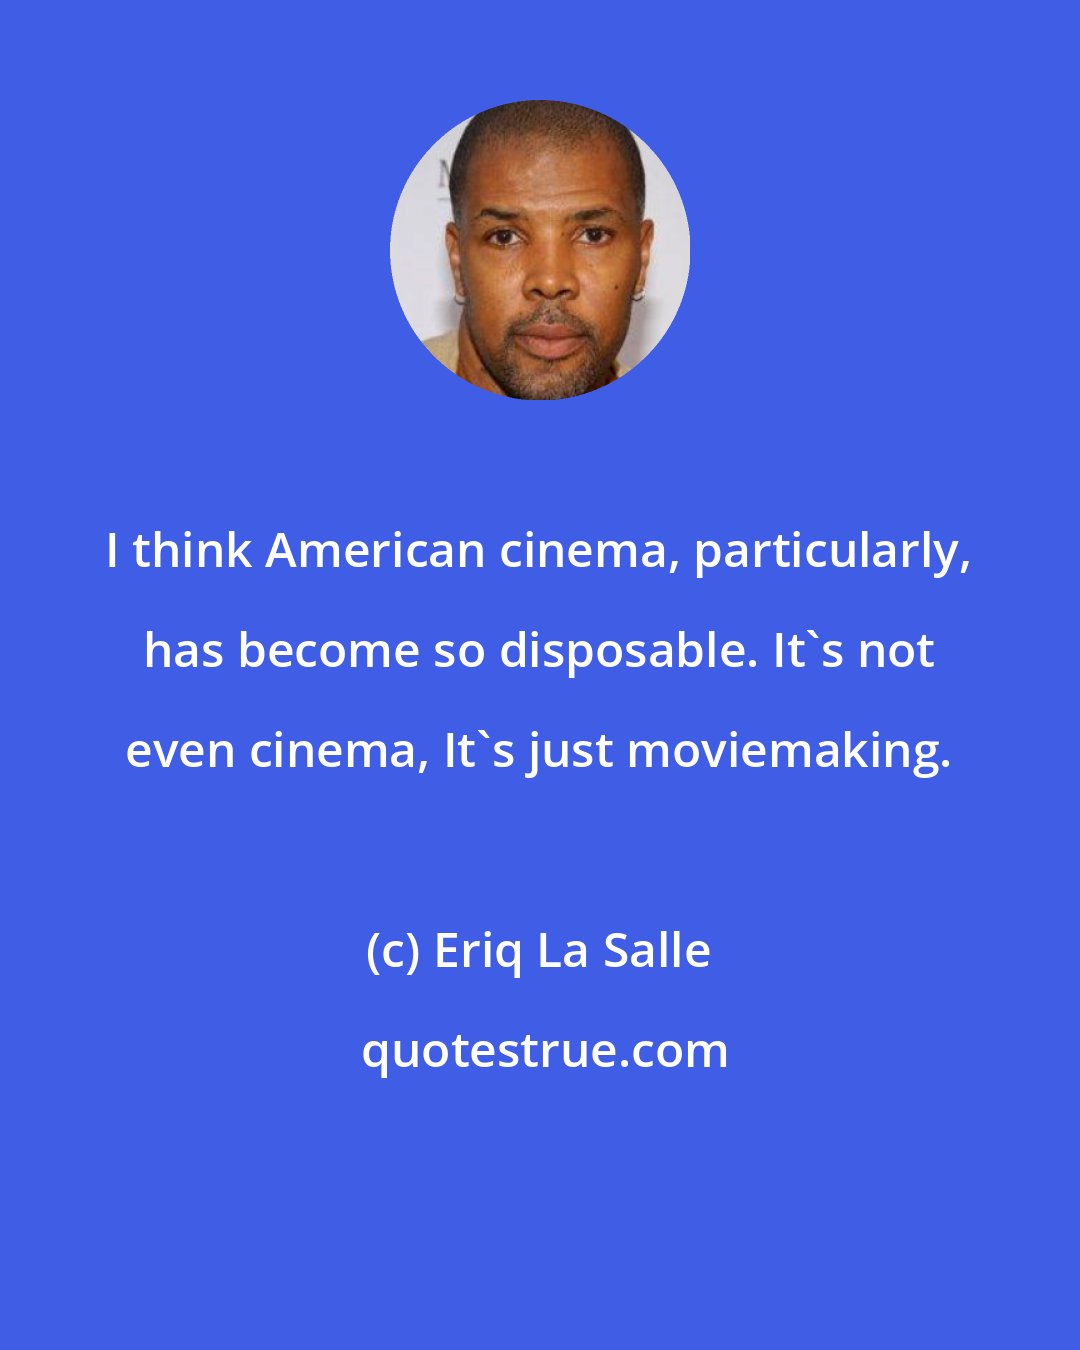 Eriq La Salle: I think American cinema, particularly, has become so disposable. It's not even cinema, It's just moviemaking.